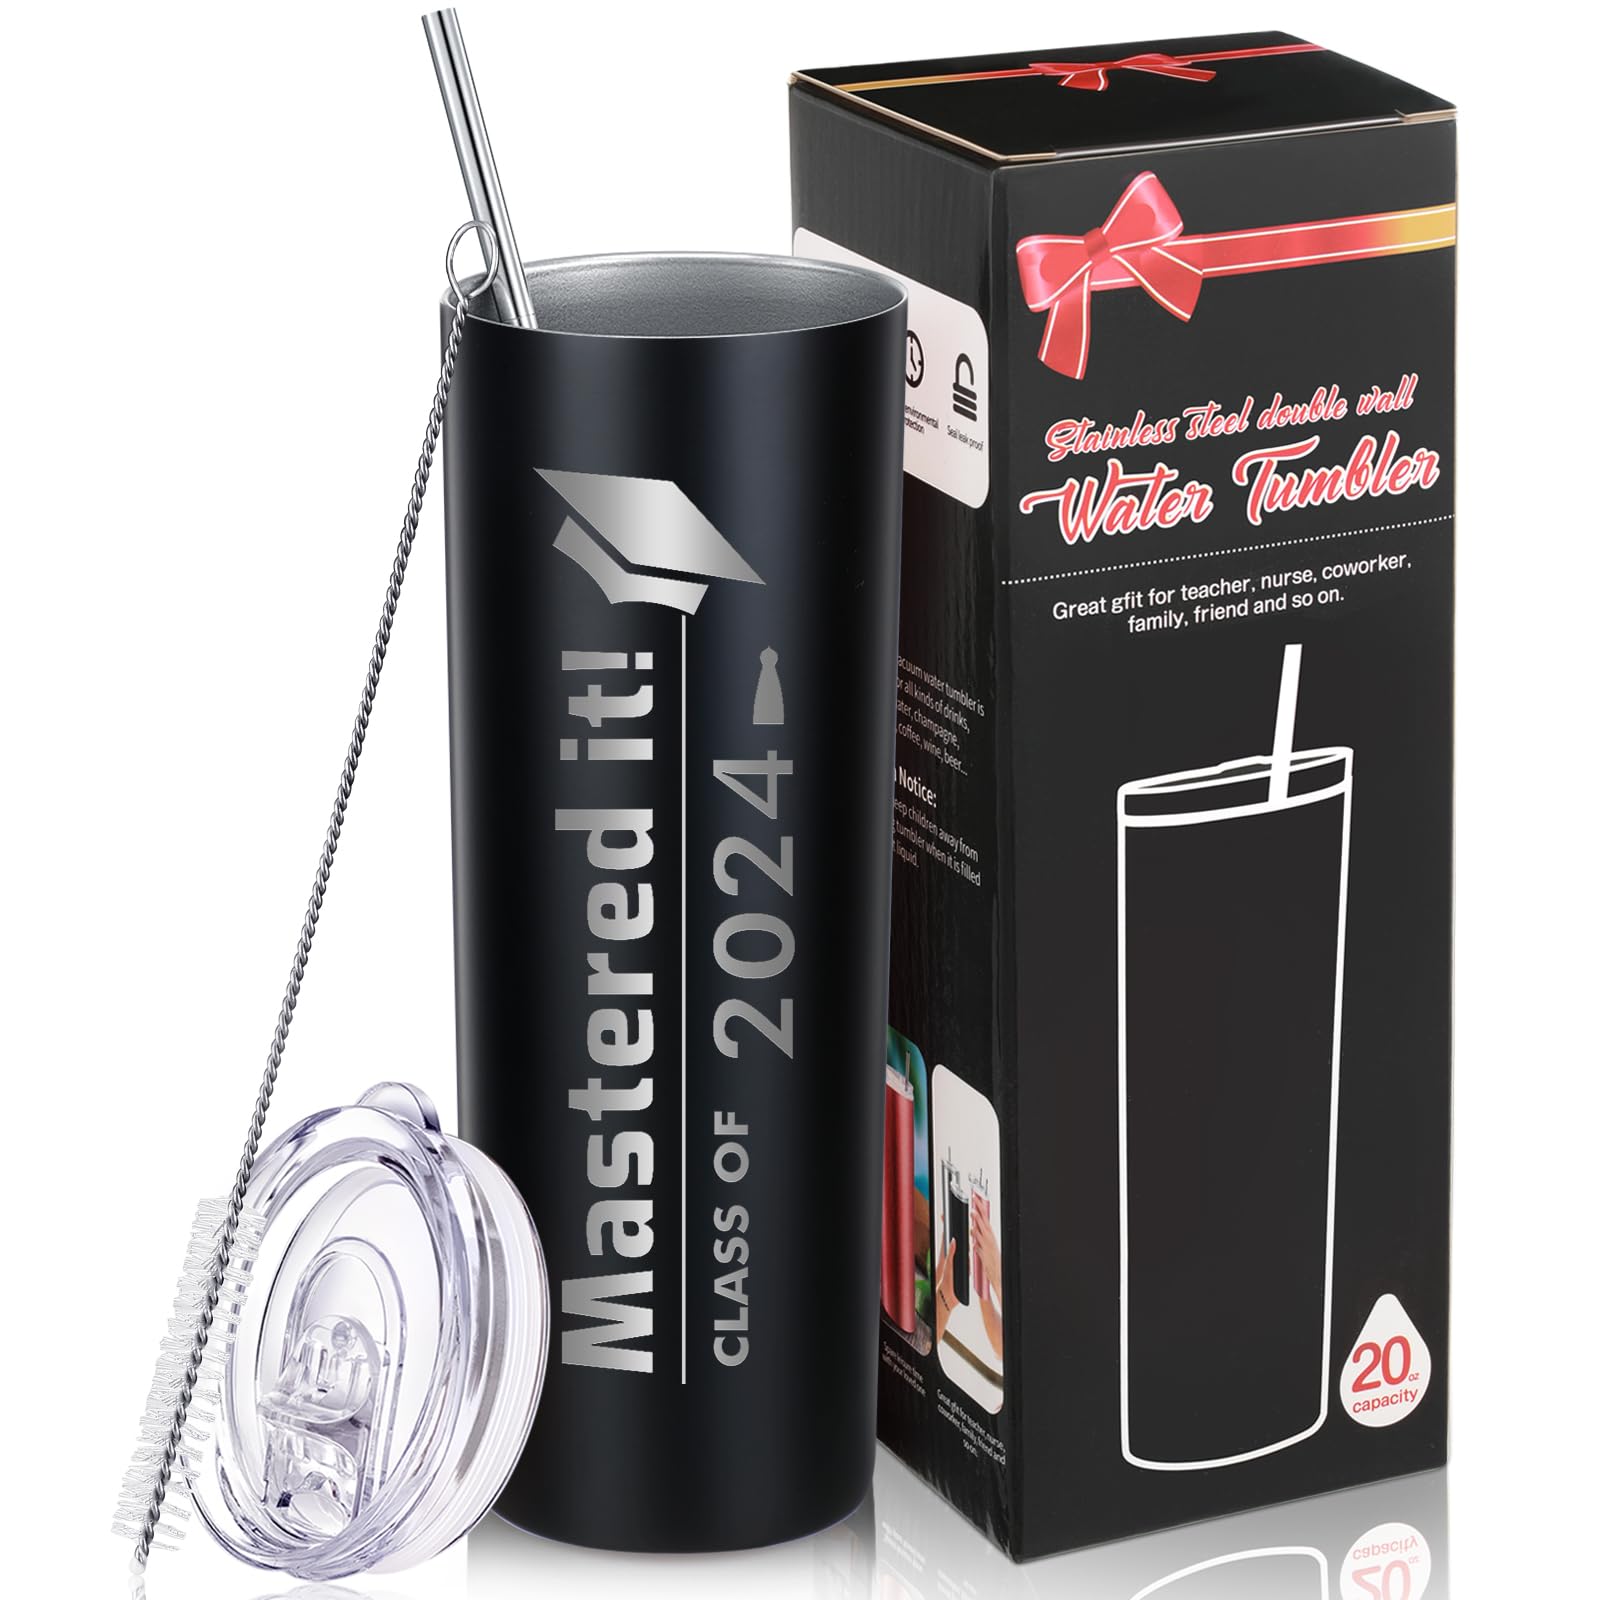 Patelai Graduation Gifts for Mastering Degree, Mastered It 2024 Masters Graduation Coffee Mug for High School College Graduate, 20 oz Water Tumbler with Gift Box Straw and Brush (Black,1 Pc)